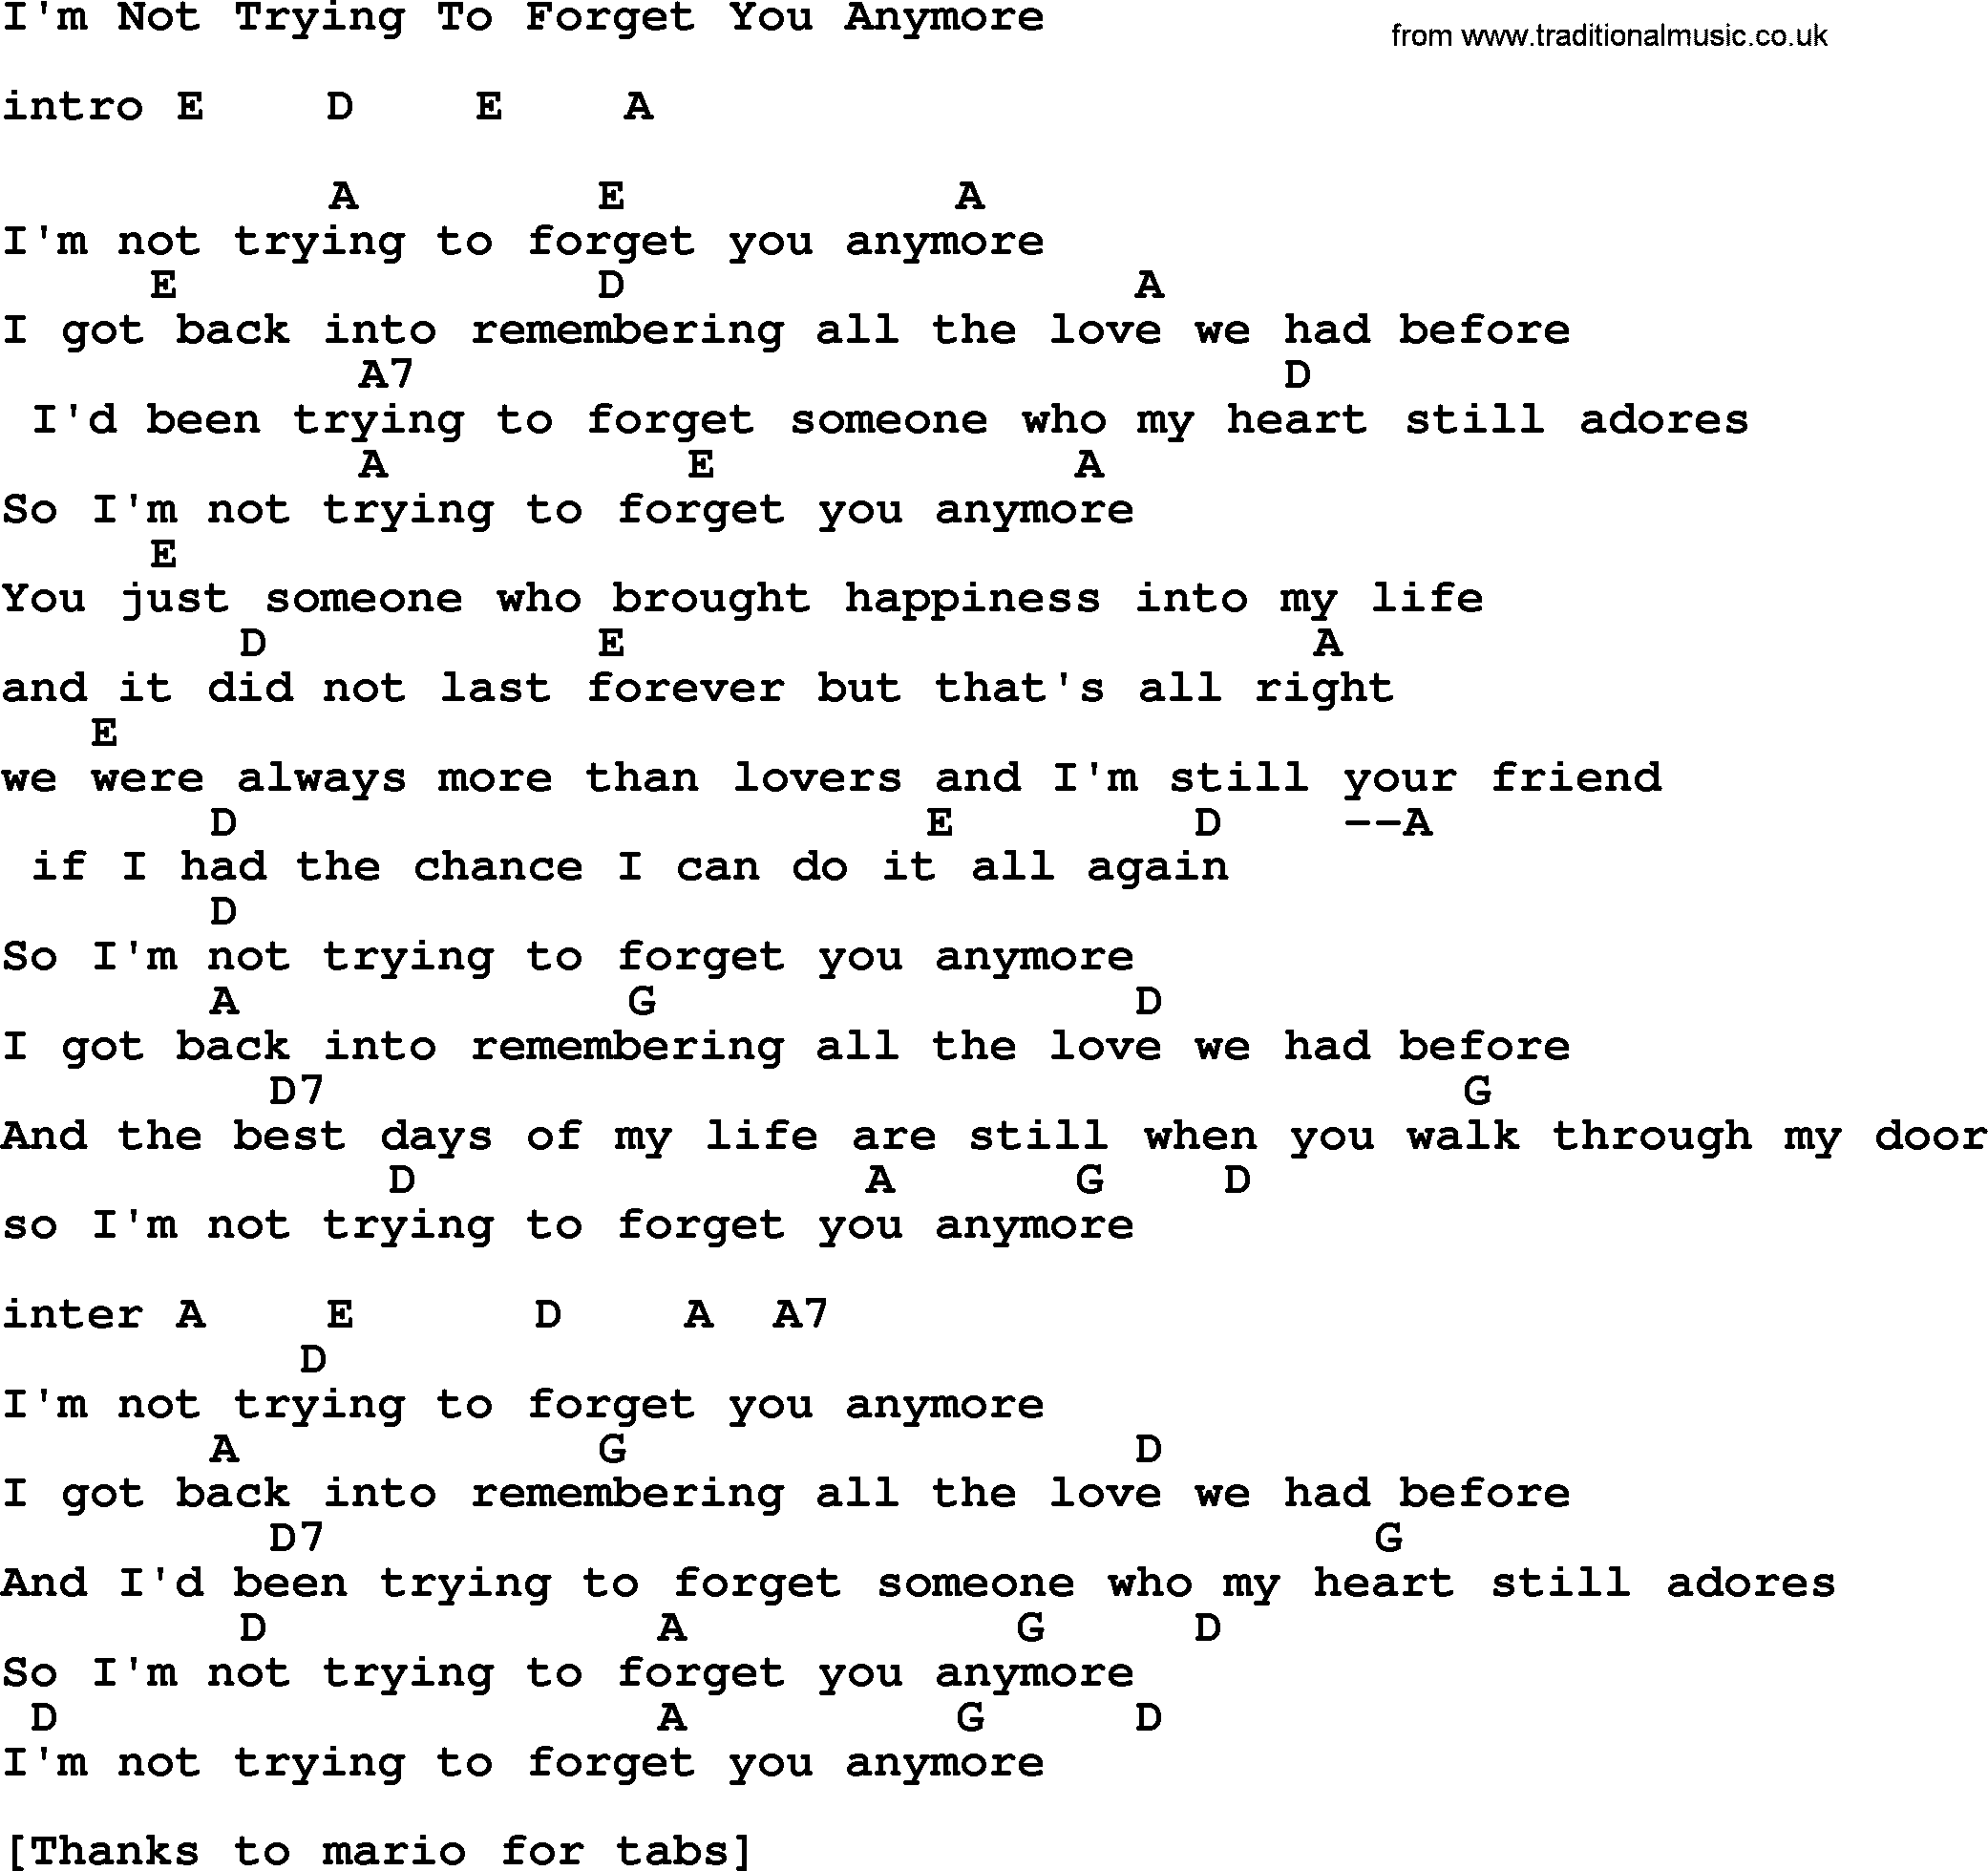 Willie Nelson song: I'm Not Trying To Forget You Anymore, lyrics and chords